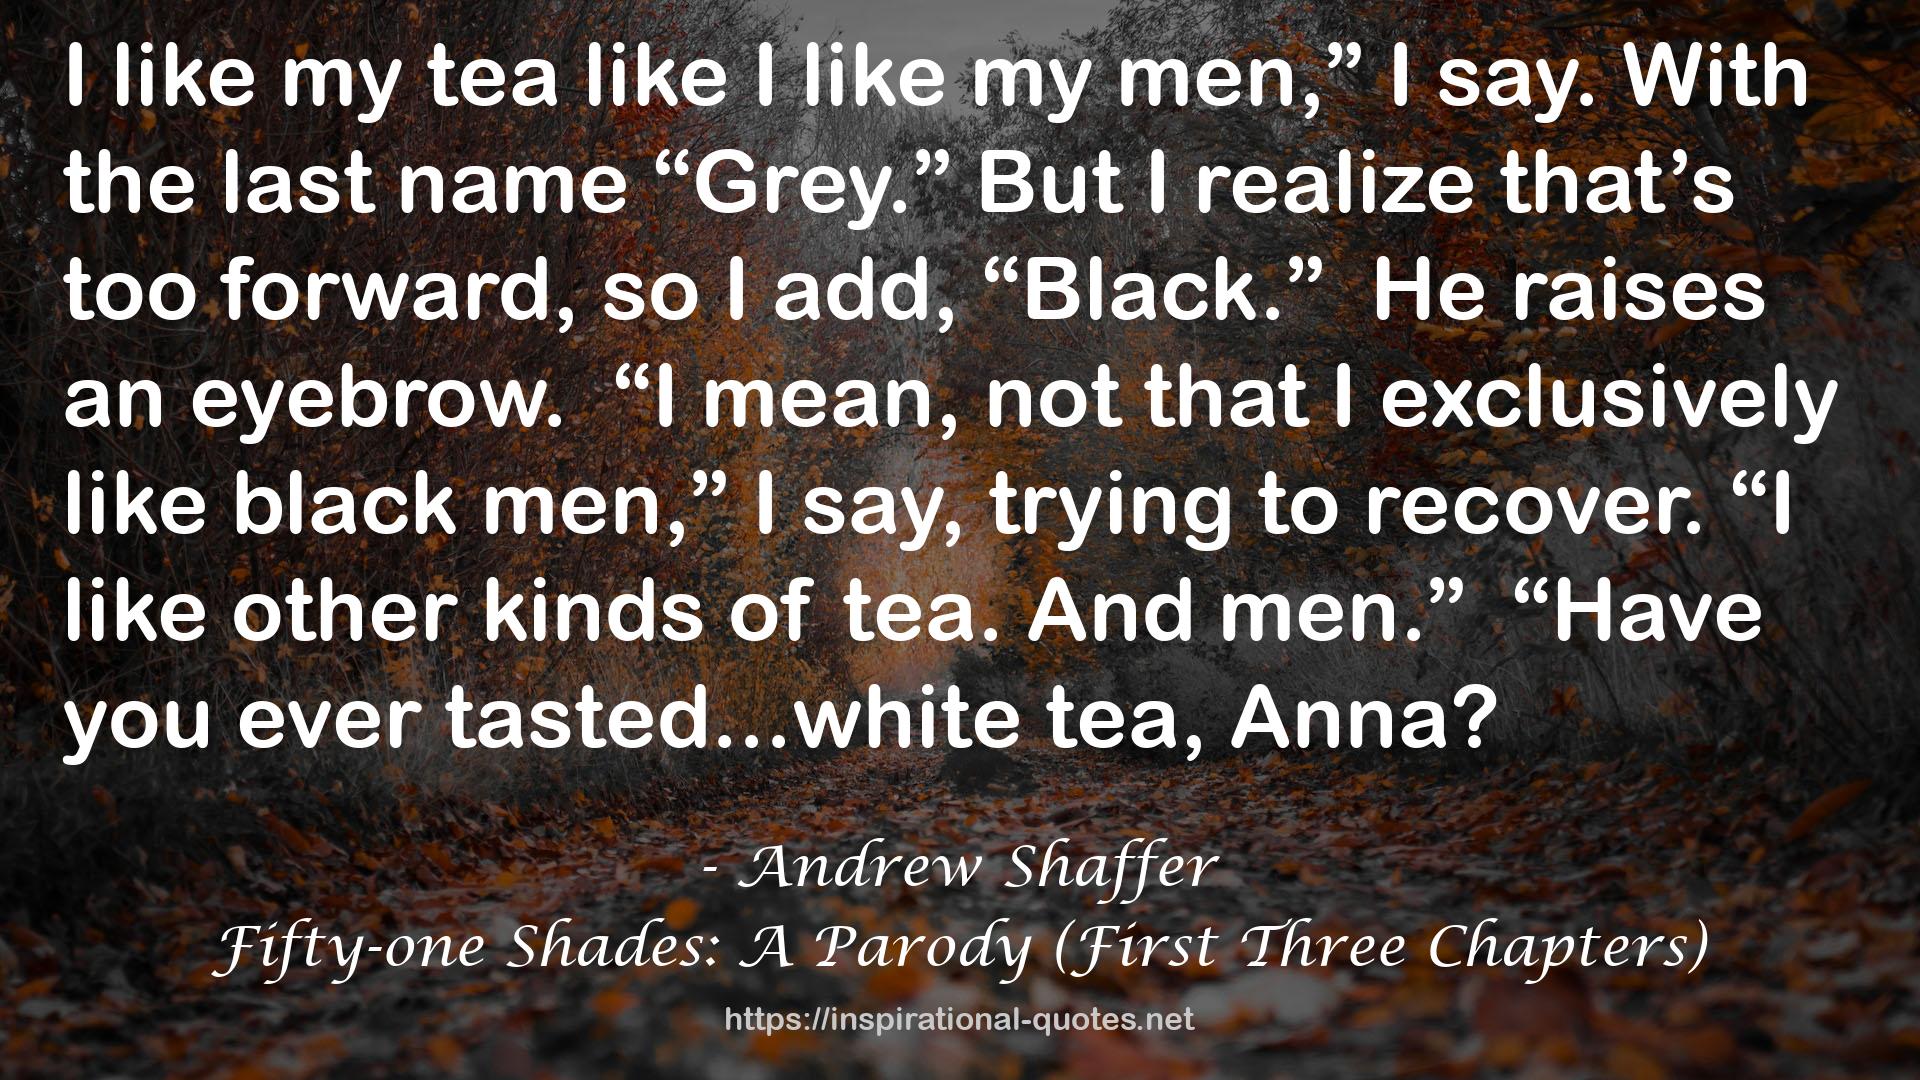 Fifty-one Shades: A Parody (First Three Chapters) QUOTES